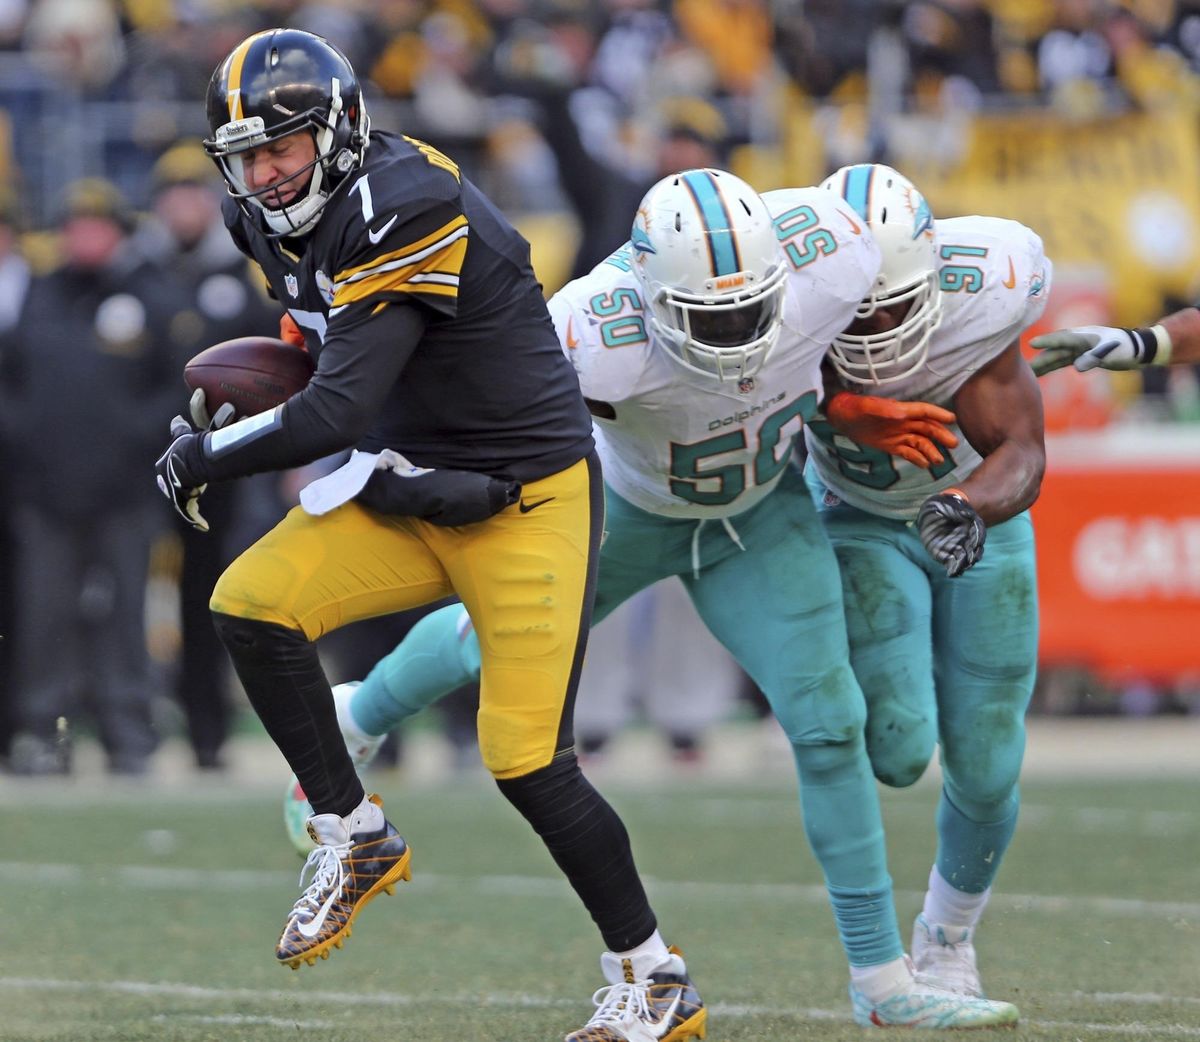 Pittsburgh quarterback Ben Roethlisberger aggravated a foot injury against the Miami Dolphins but Steelers coach Mike Tomlin said the QB should be fine to practice and play this week. (Charles Trainor Jr / Associated Press)